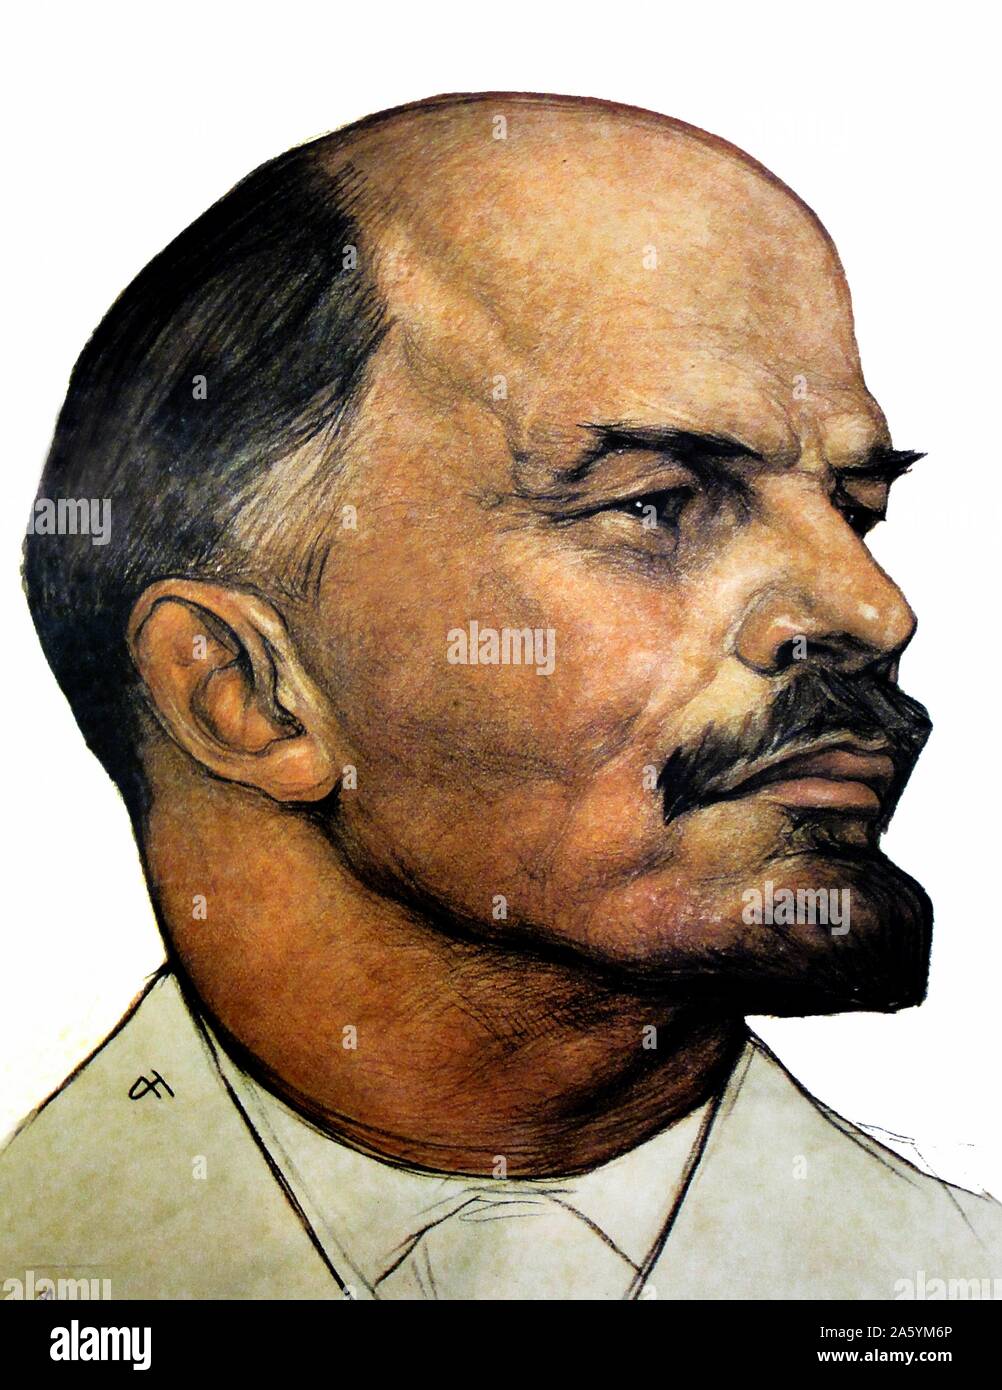 Vladimir Ilyich Ulyanov (22 April 1870 ñ 21 January 1924). Russian communist revolutionary, politician and political theorist. served as head of government of the Russian Soviet Federative Socialist Republic from 1917, and of the Soviet Union from 1922 until his death. Stock Photo